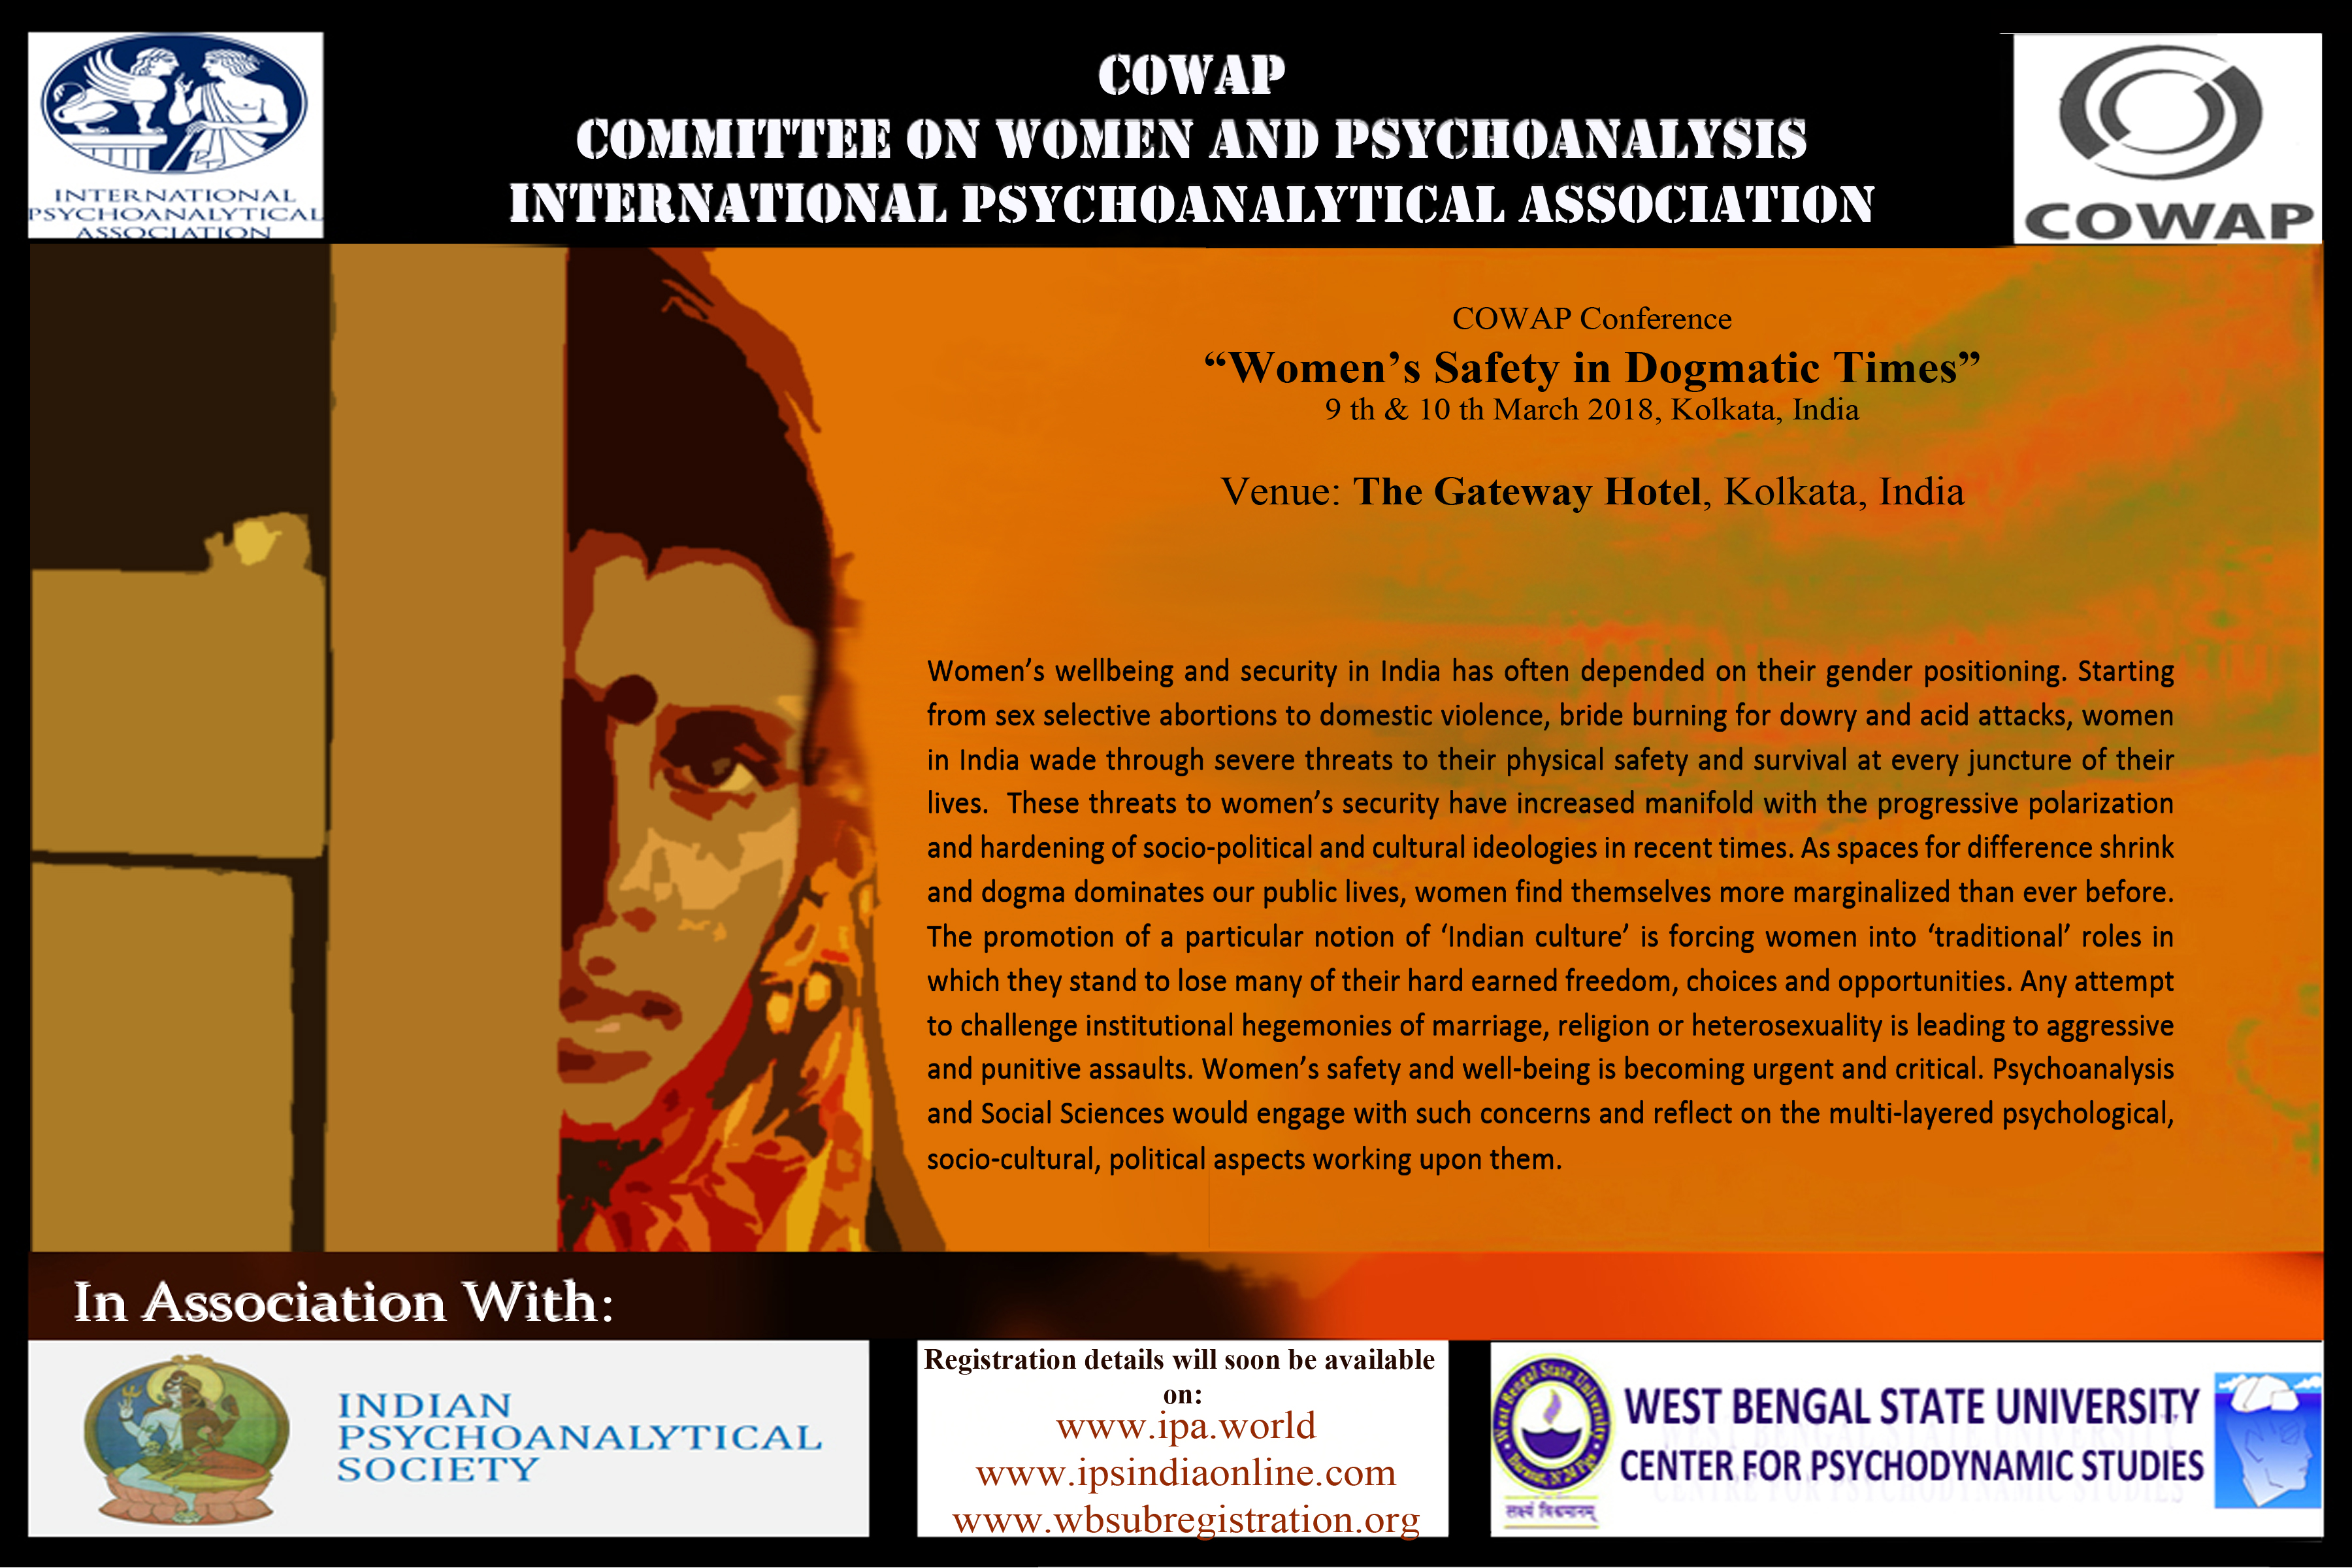 COWAP Conference “Women’s Safety in Dogmatic Times”